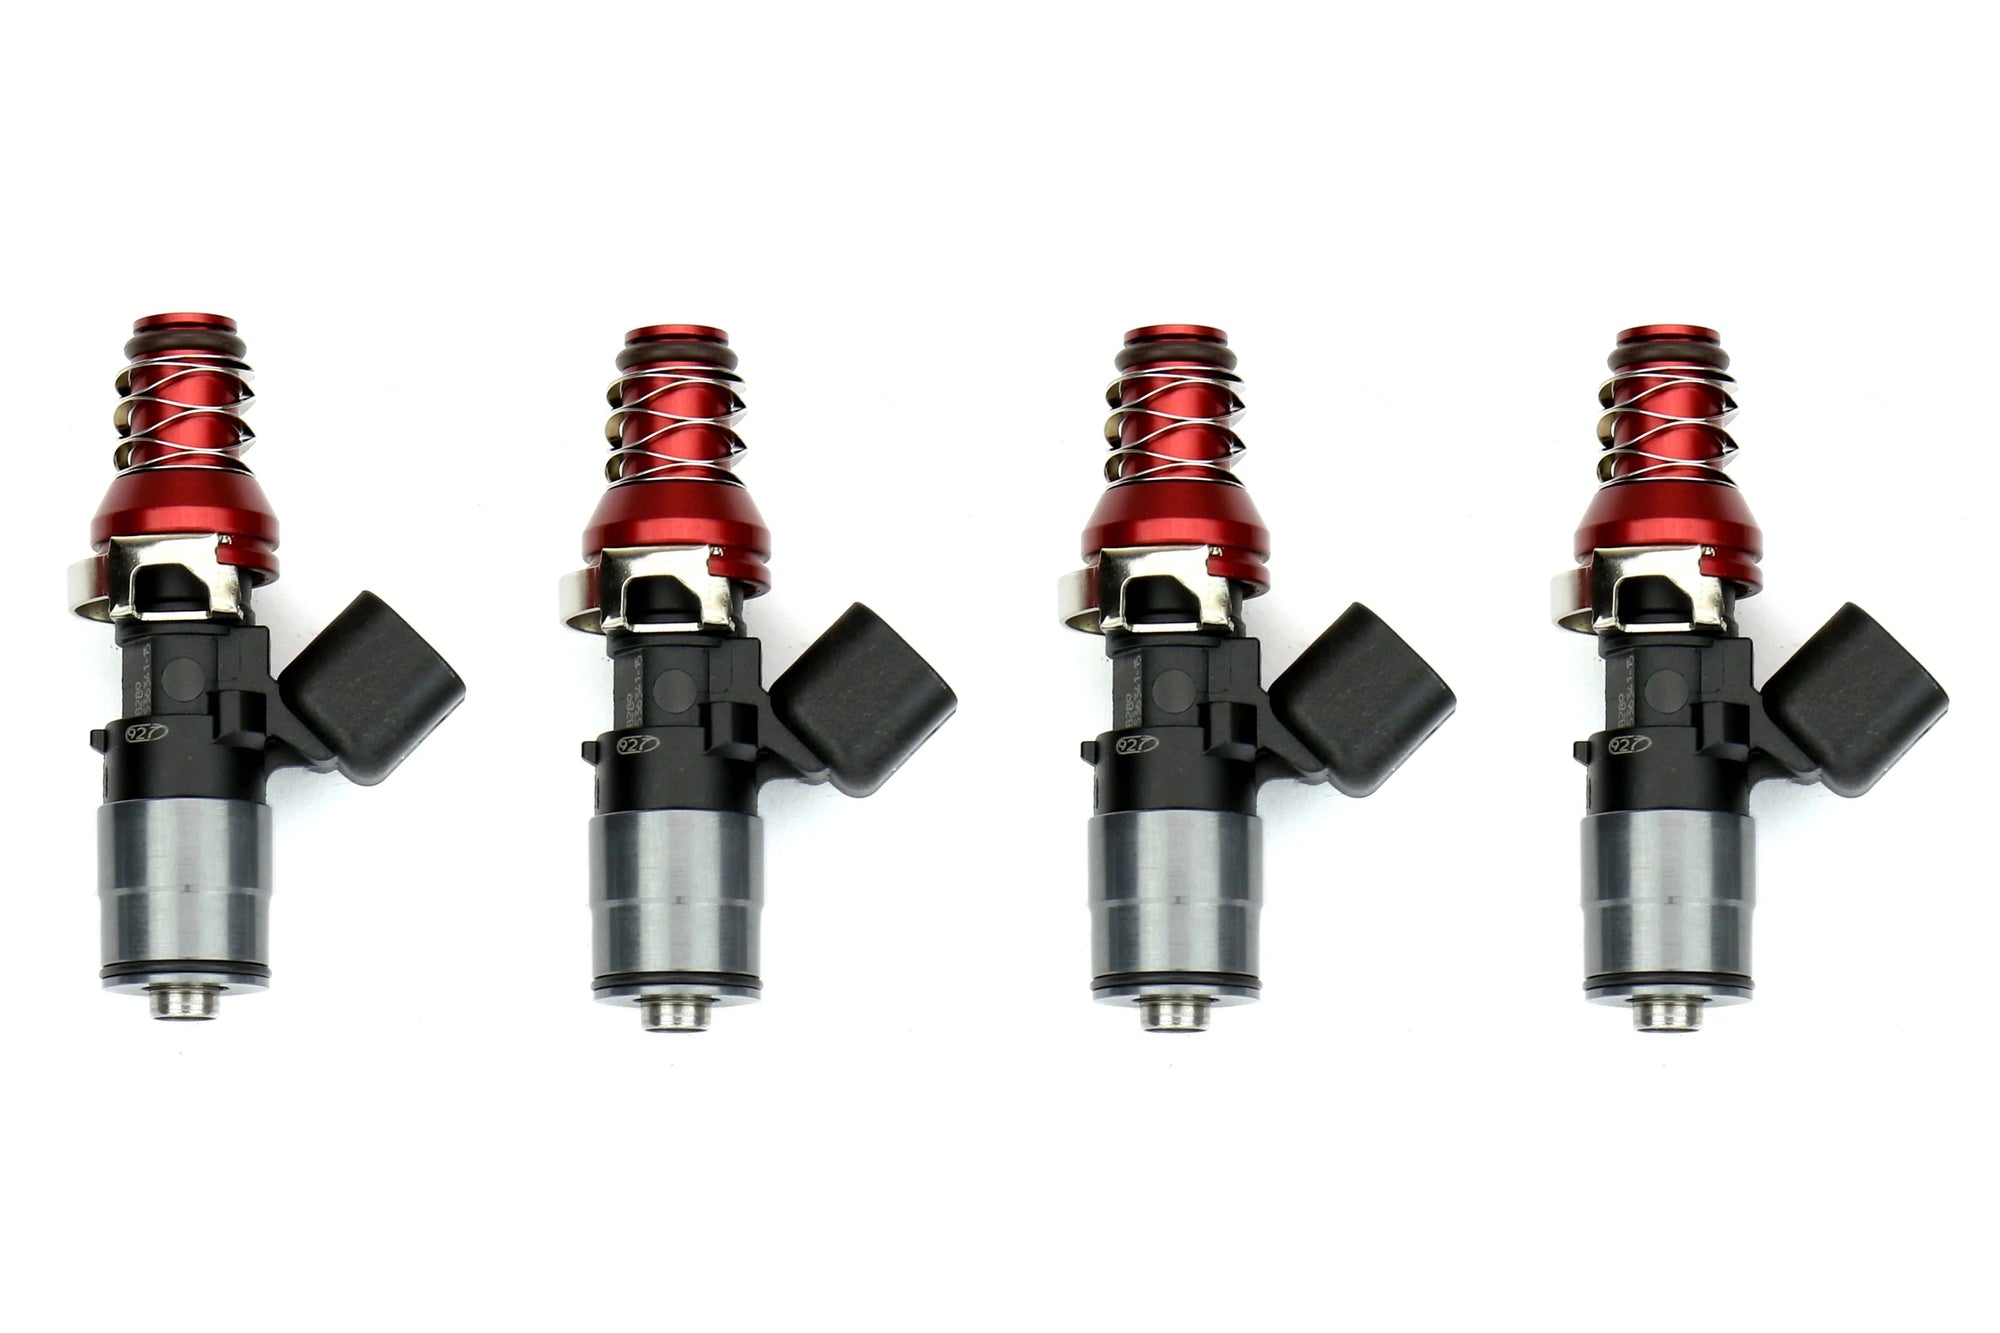 Injector Dynamics 1700-XDS Series Injectors - BMW Applications